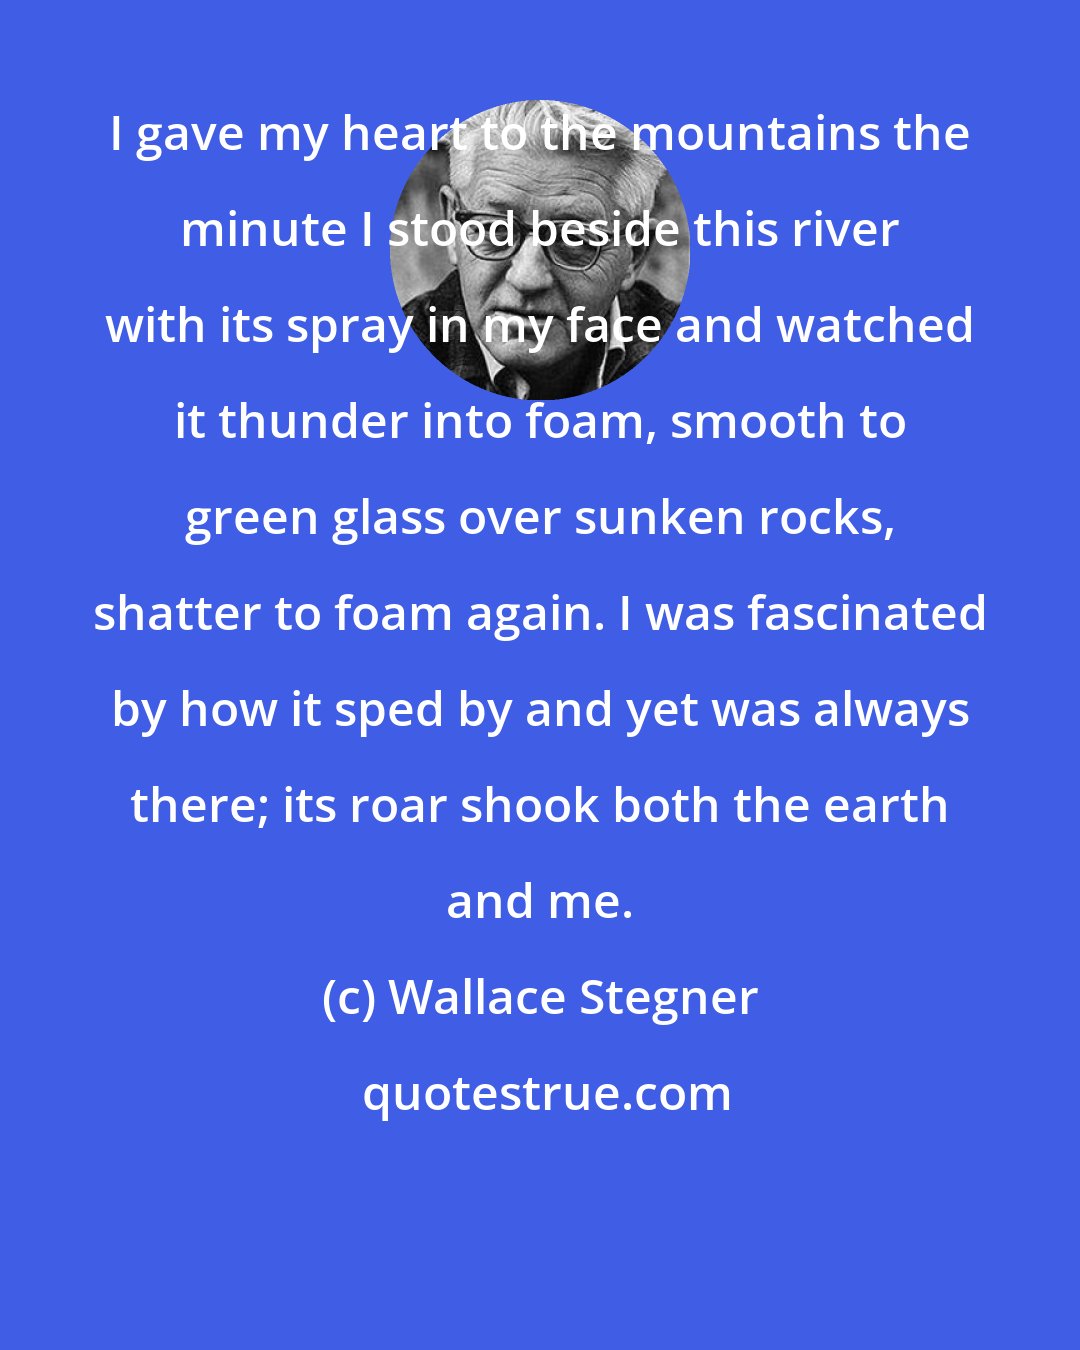 Wallace Stegner: I gave my heart to the mountains the minute I stood beside this river with its spray in my face and watched it thunder into foam, smooth to green glass over sunken rocks, shatter to foam again. I was fascinated by how it sped by and yet was always there; its roar shook both the earth and me.